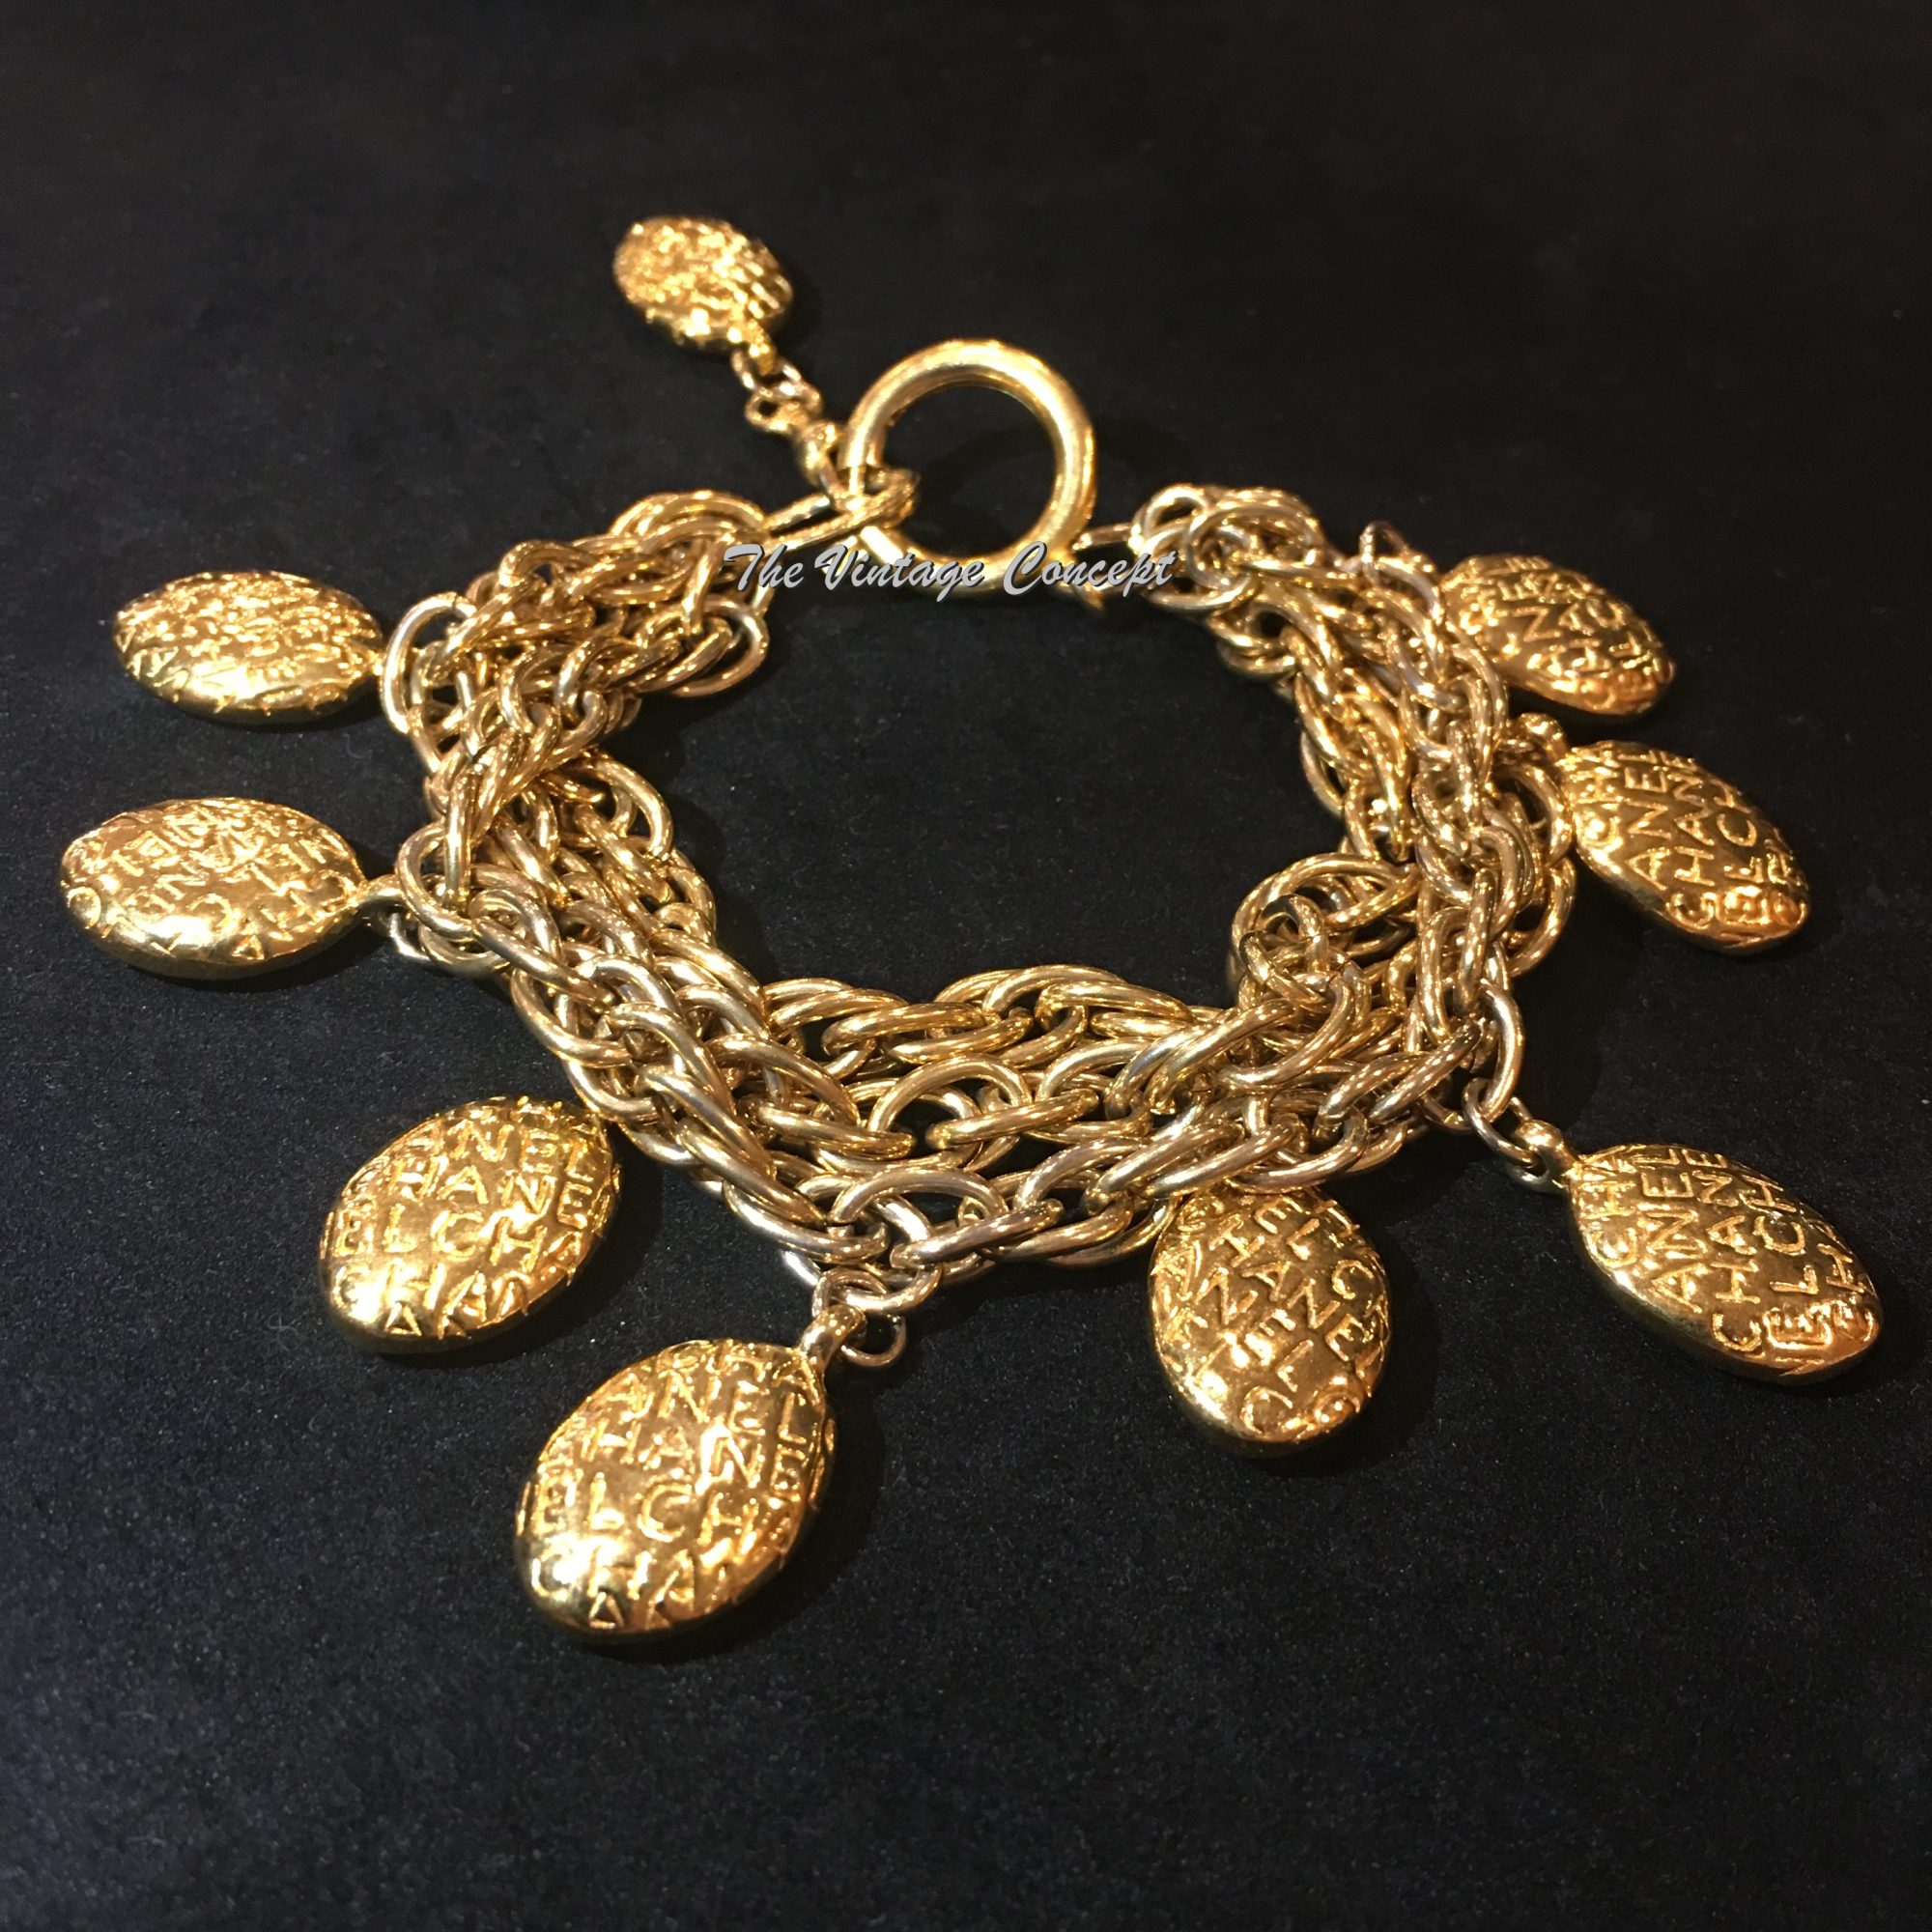 Chanel Gold Tone Multi Strand Charm Logo Bracelet from 80's (SOLD) - The Vintage Concept